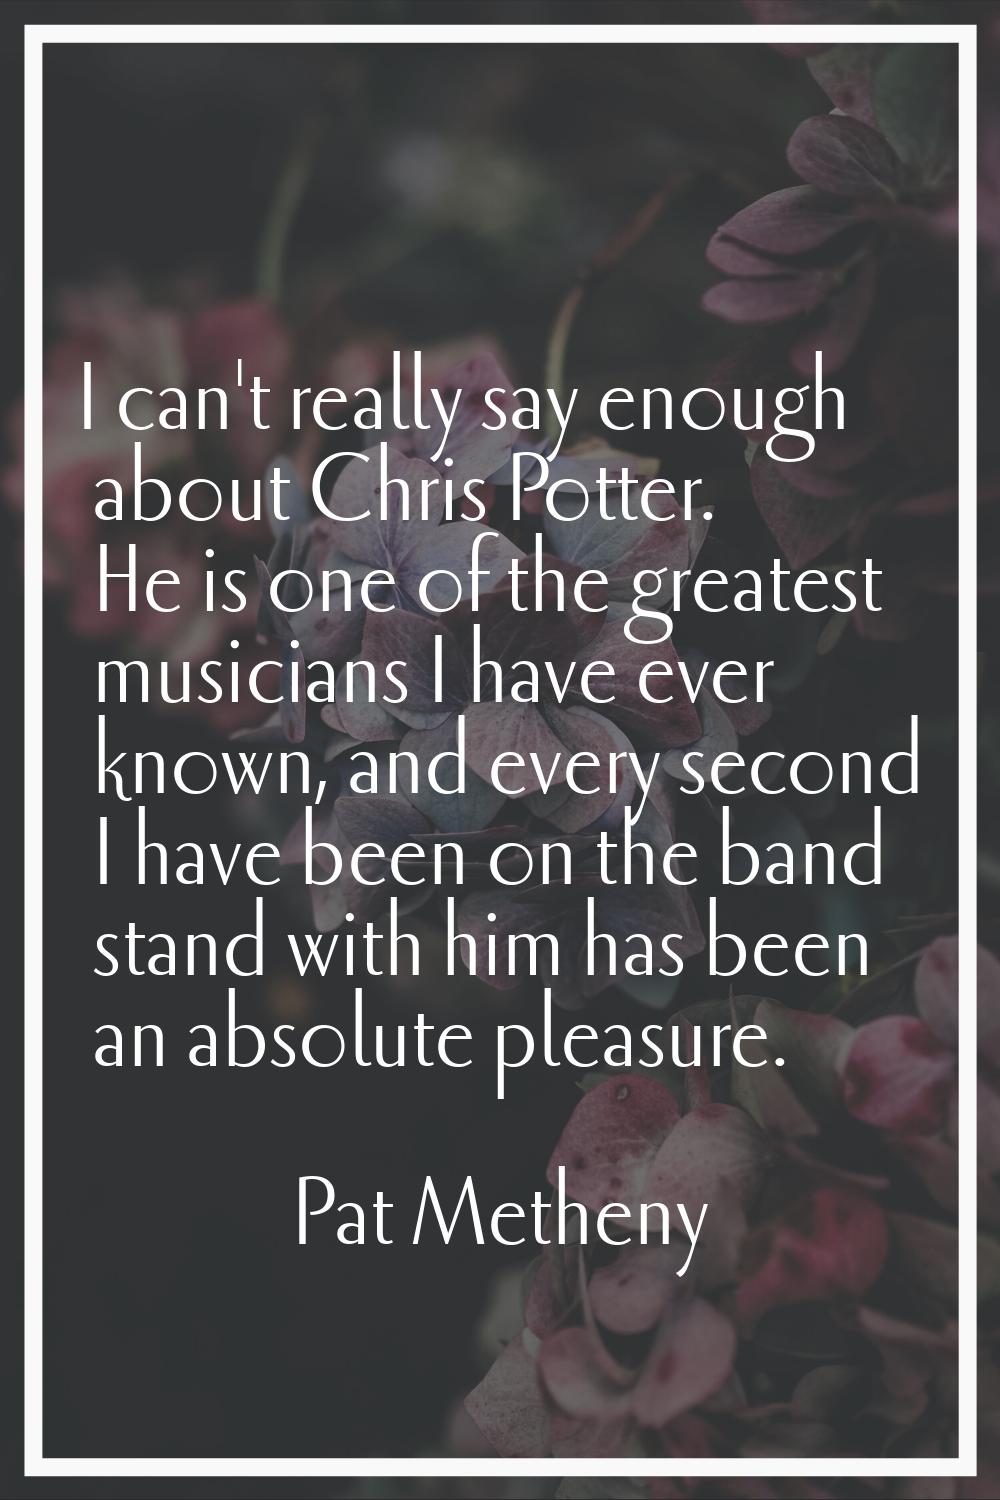 I can't really say enough about Chris Potter. He is one of the greatest musicians I have ever known